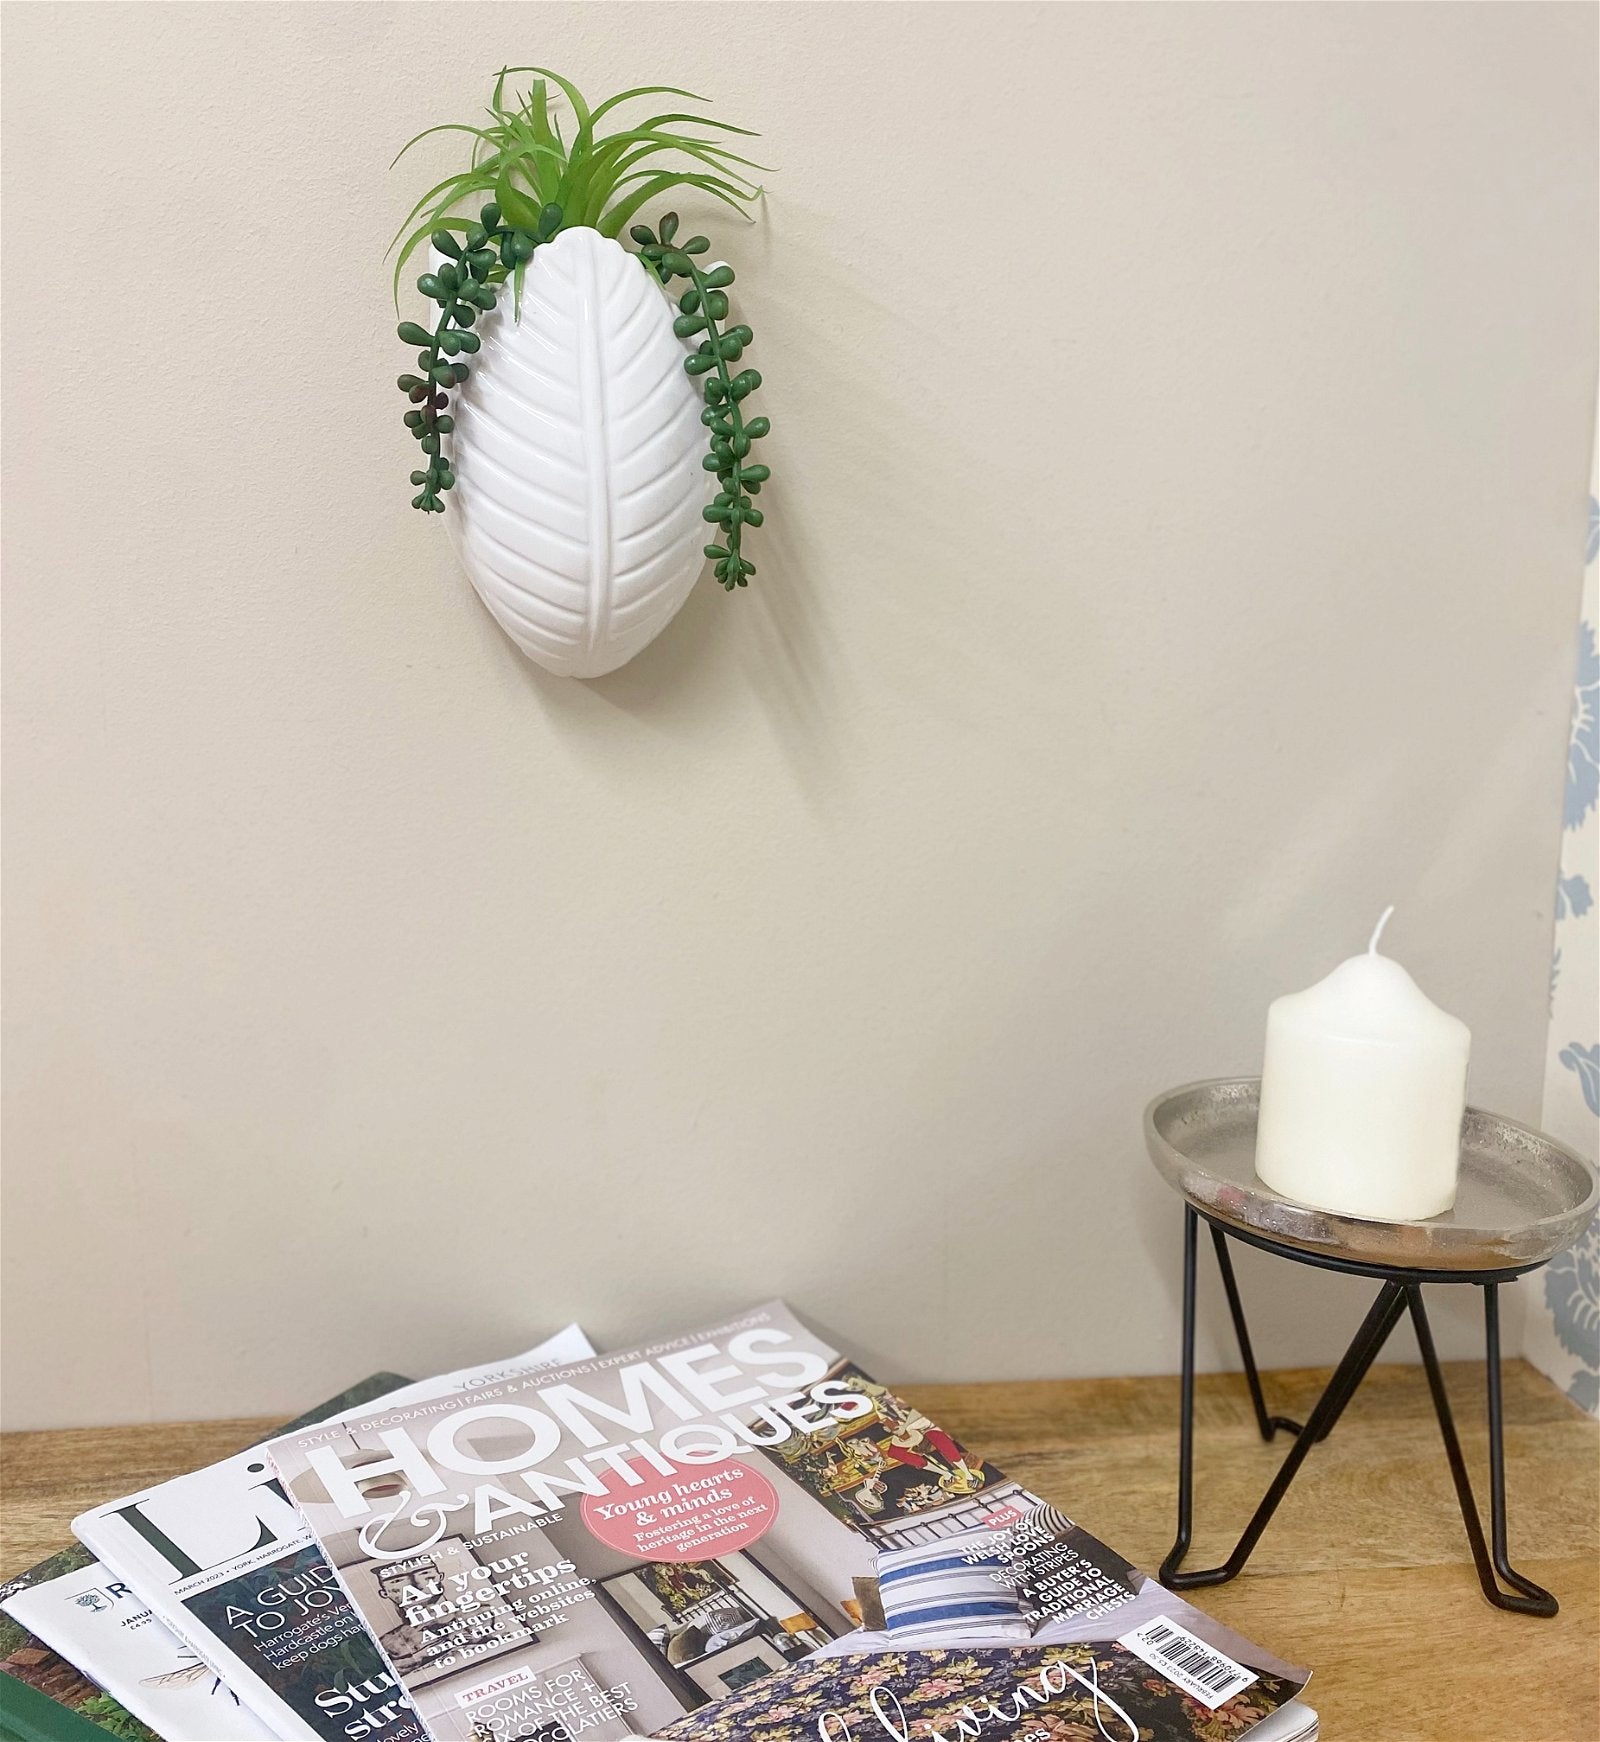 Faux Succulents in Wall Planter - a Cheeky Plant